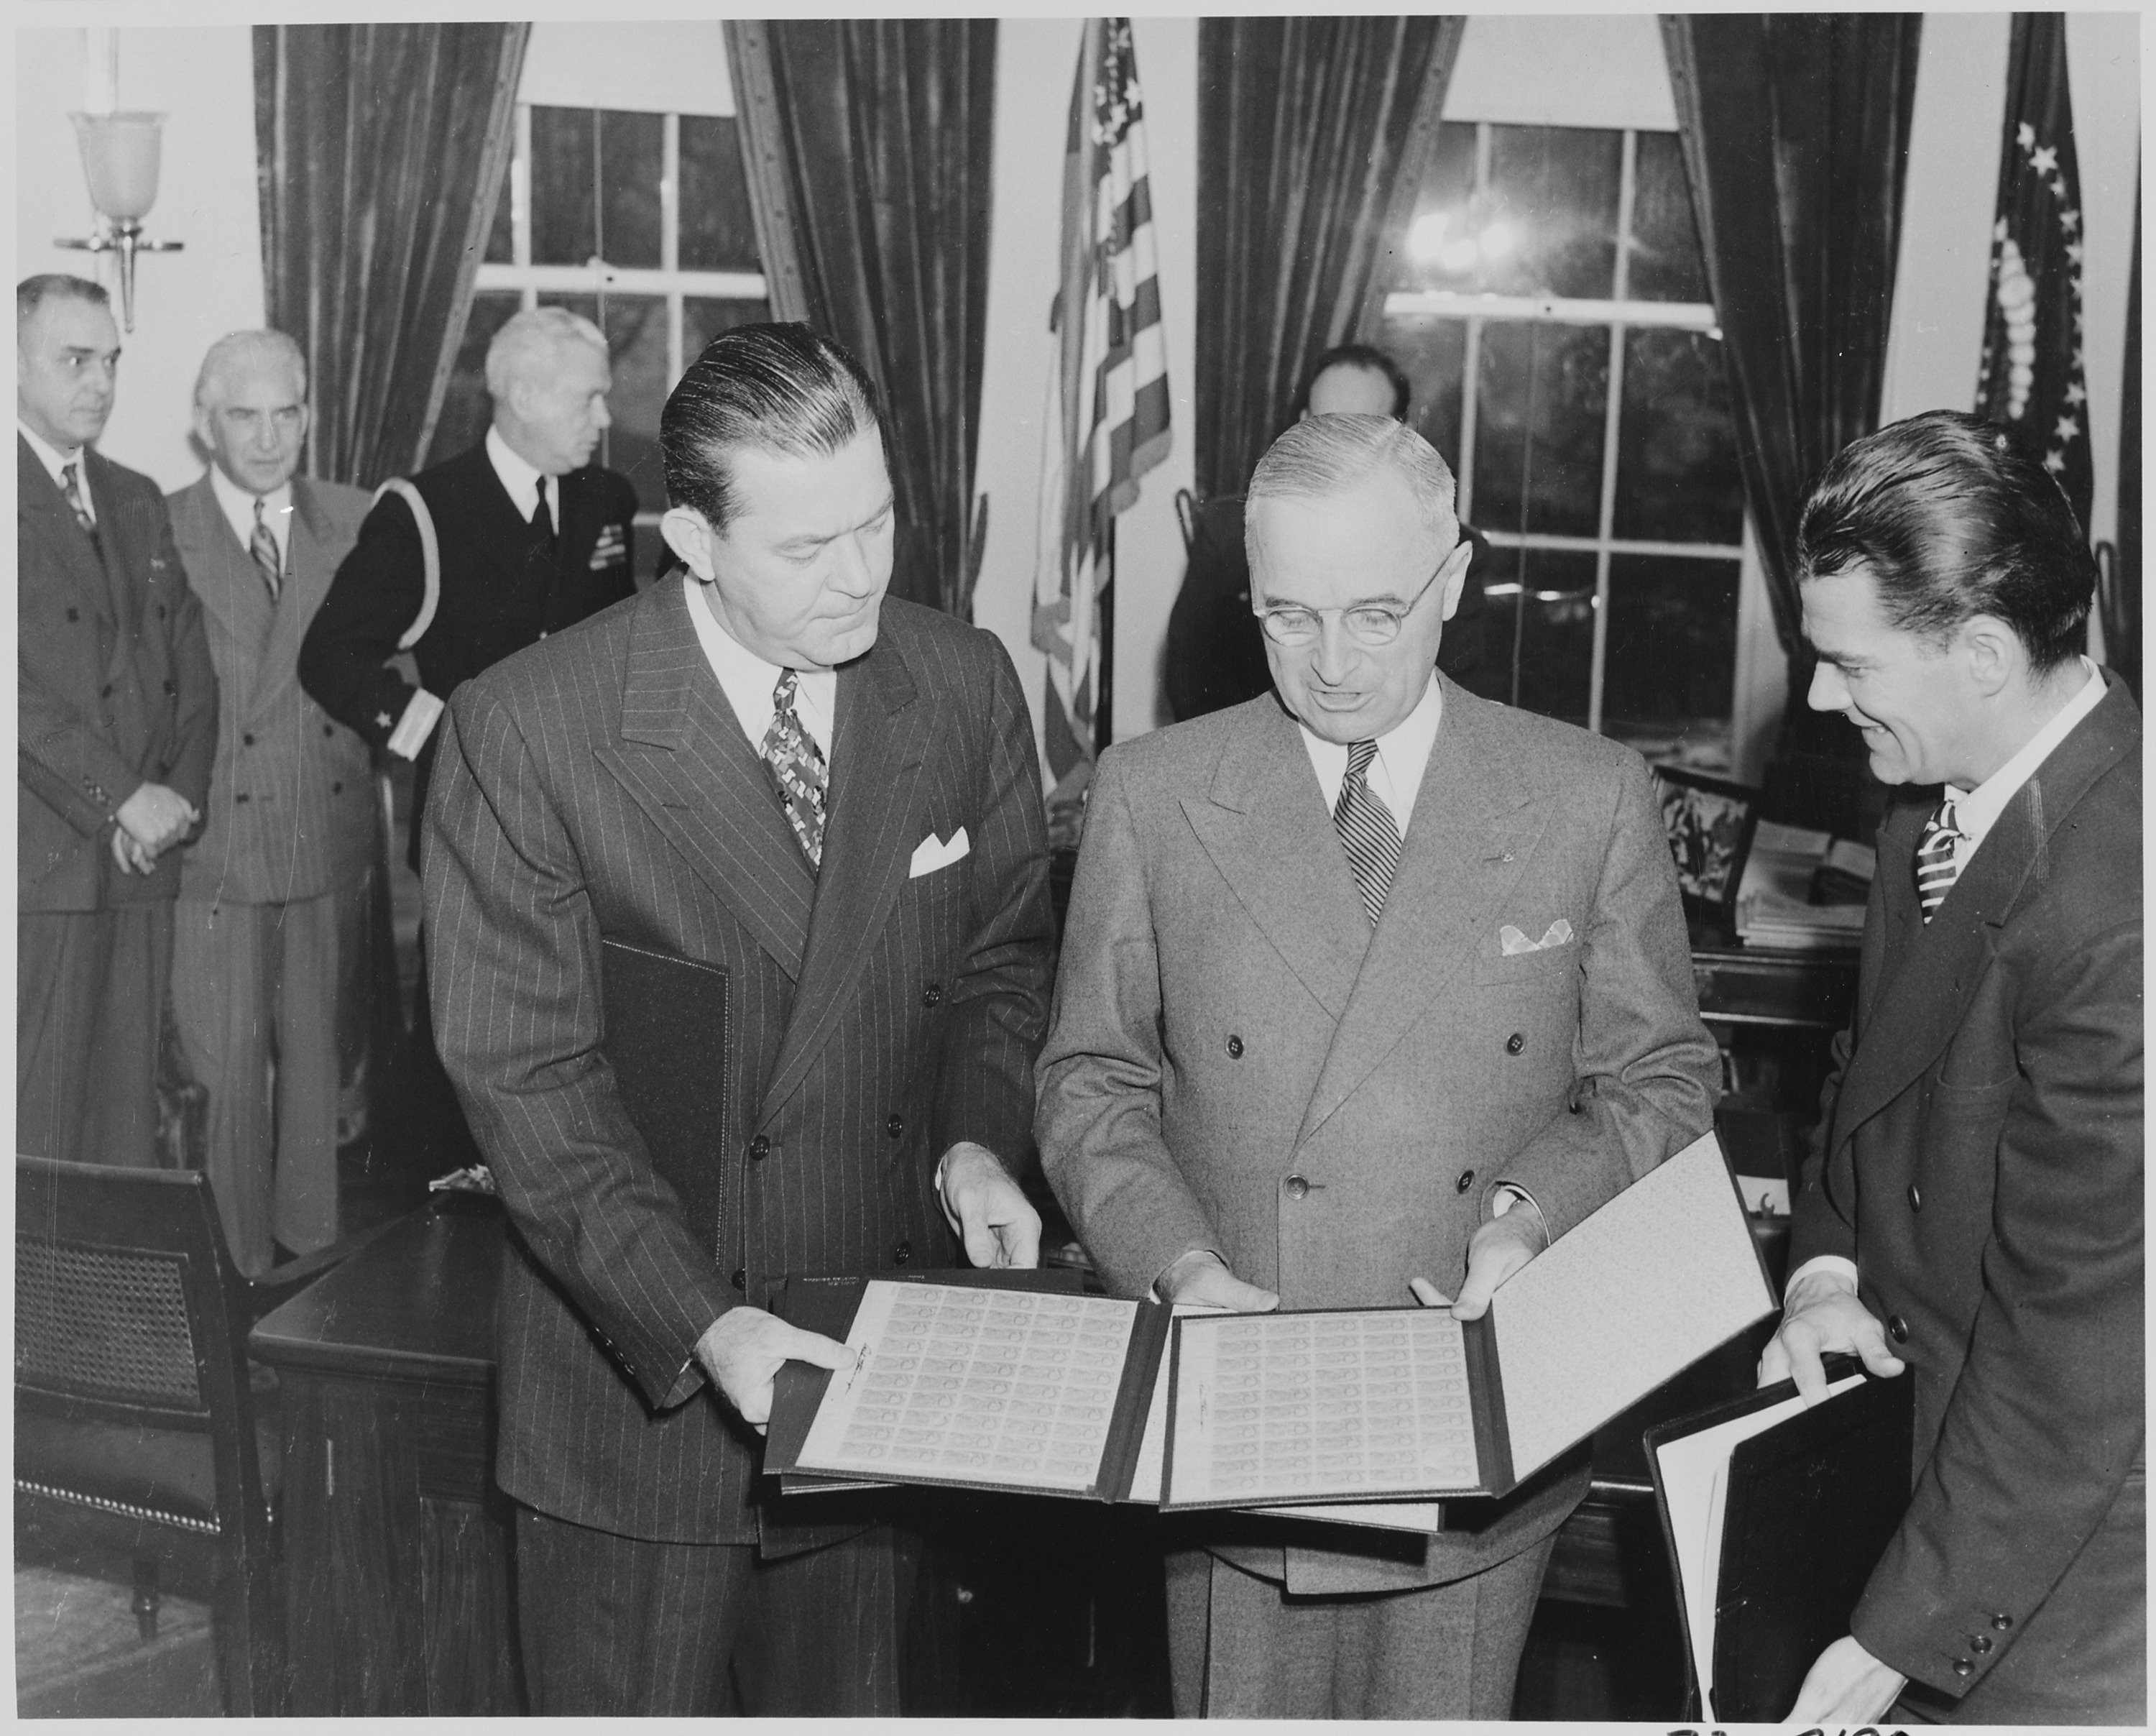 President Harry S. Truman receiving a set of stamps honoring the late President Franklin D. Roosevelt from Postmaster General Robert Hannegan (to the President's right), January 30, 1946.